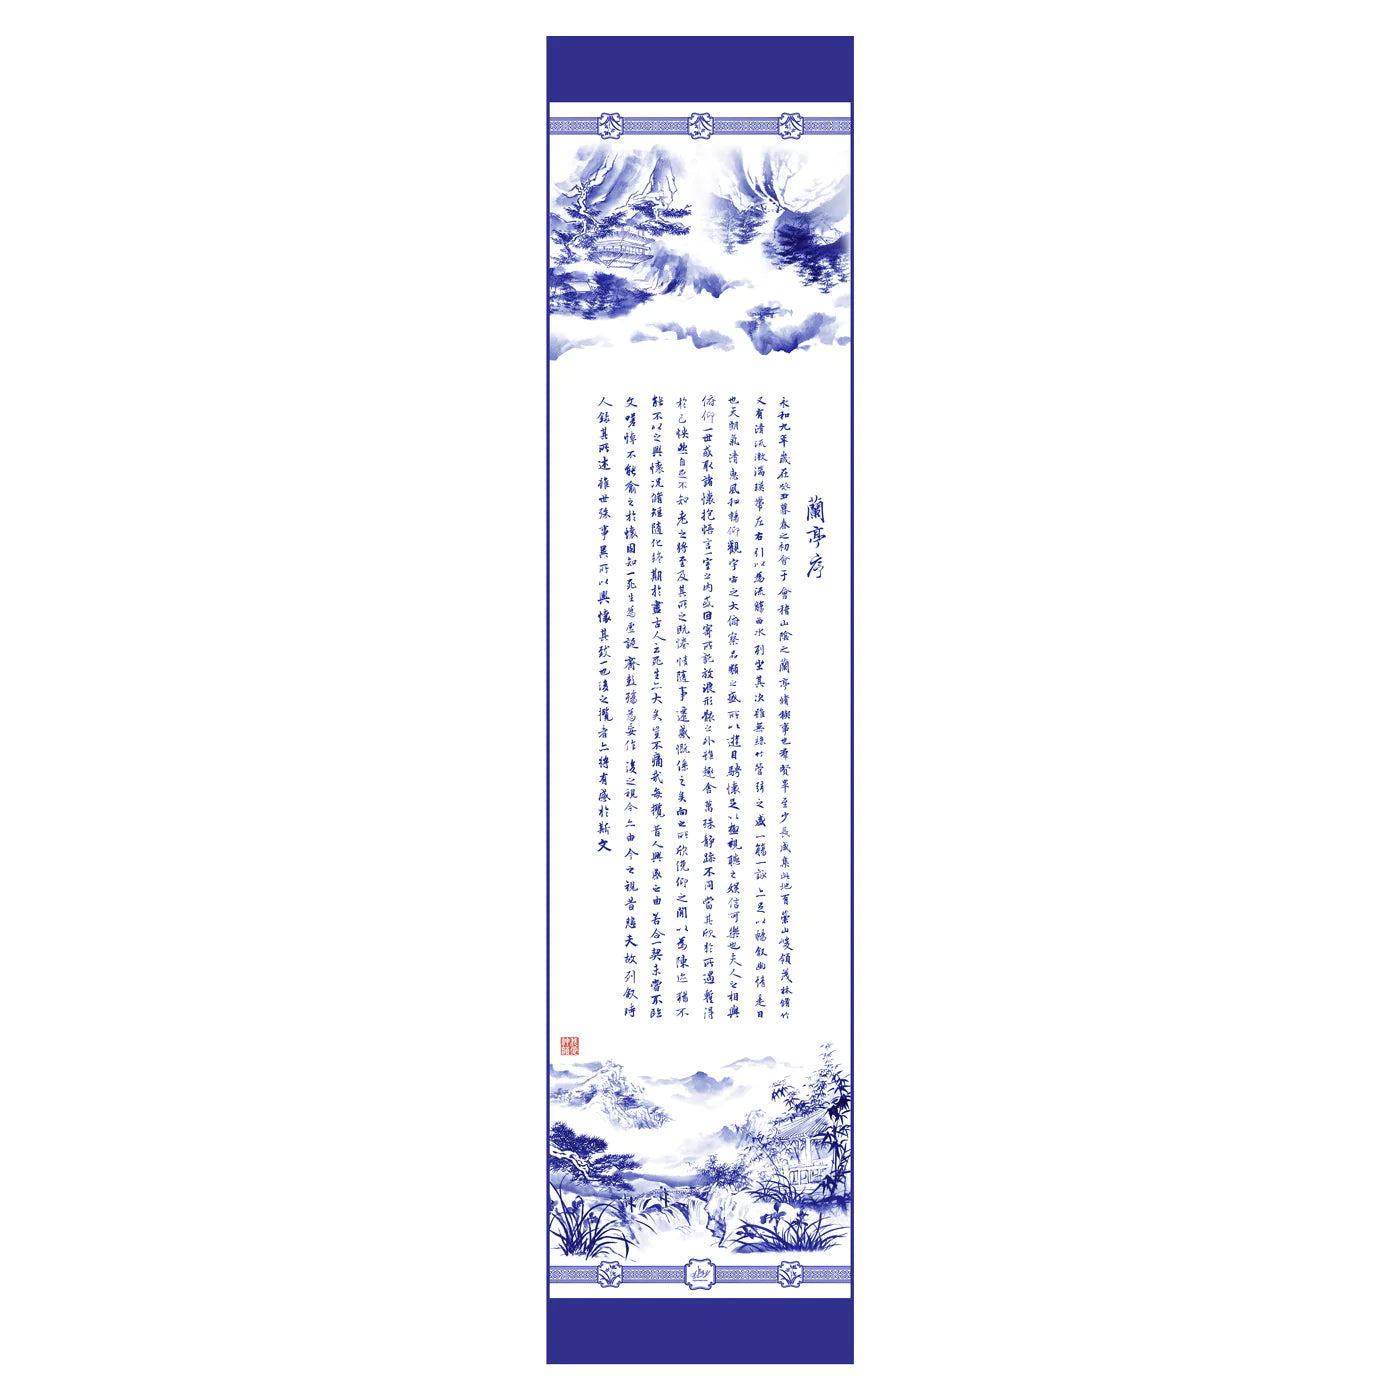 Poets of the Orchid Pavilion Long Silk Scarf